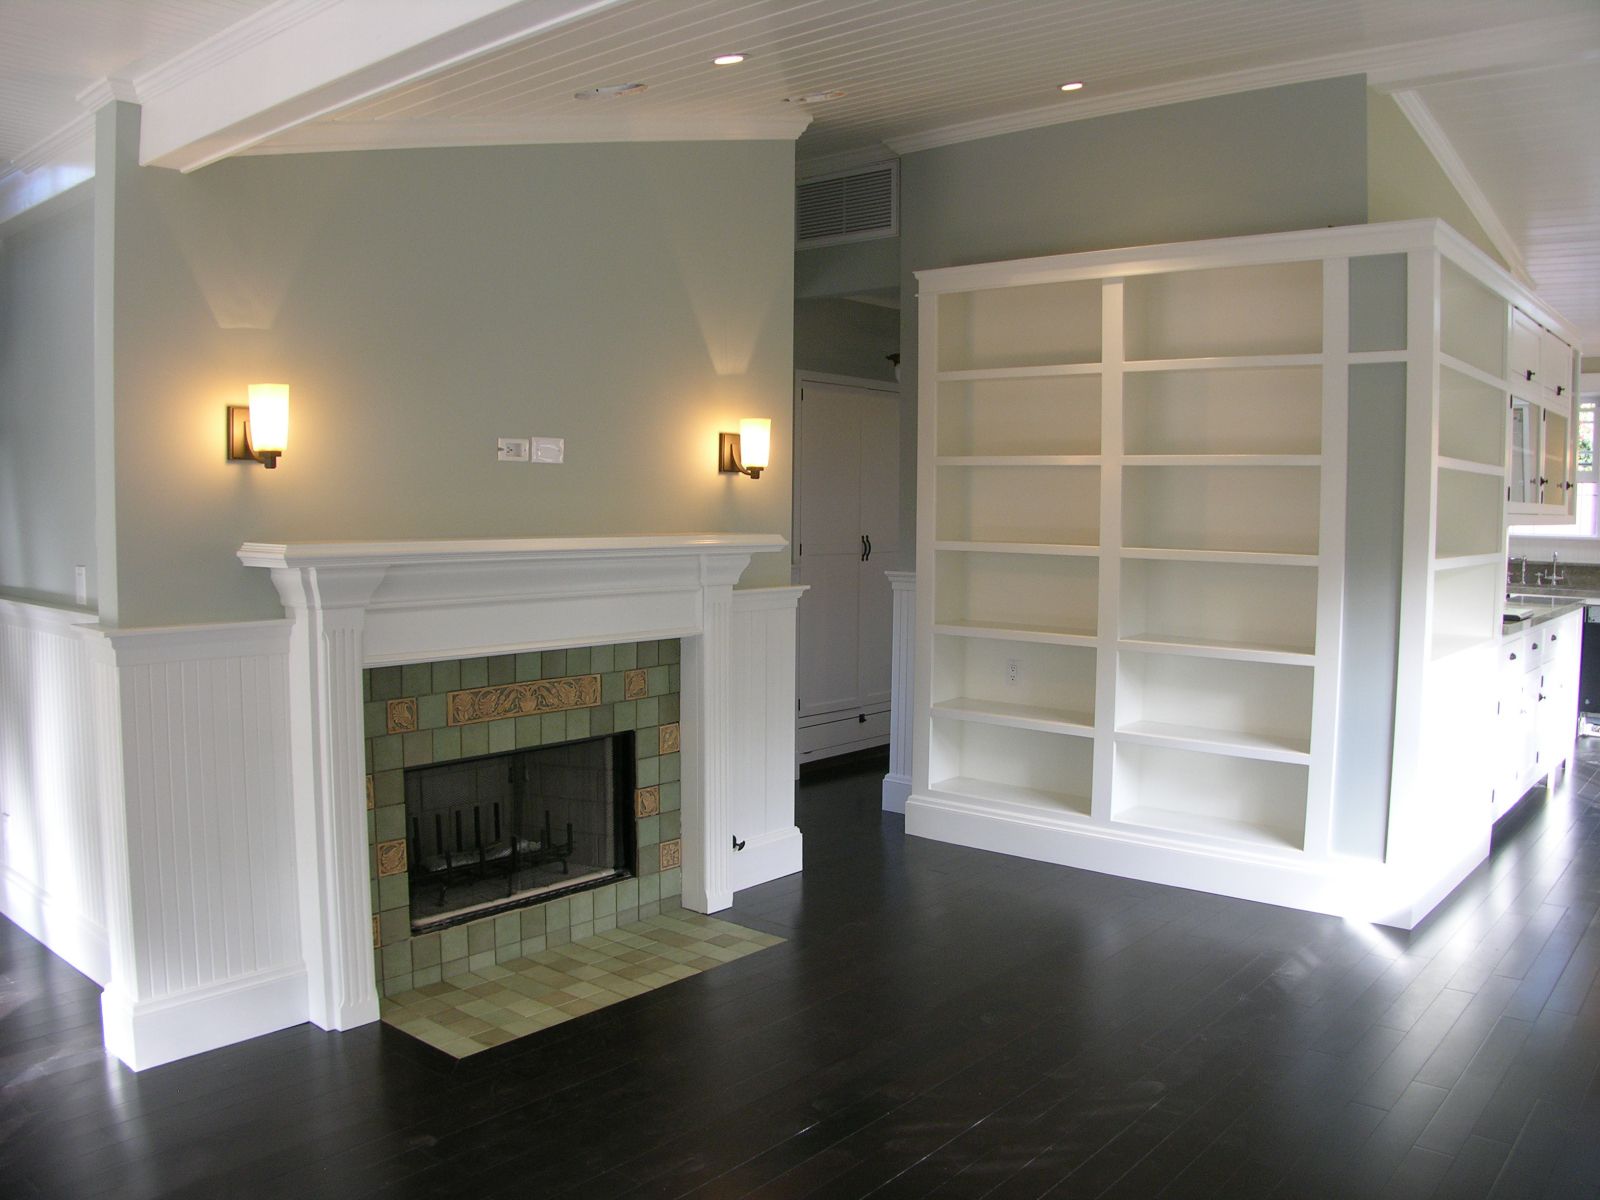 How to Build A Fireplace Mantel Shelf with Crown Molding Awesome Vaulted Ceiling Crown Molding